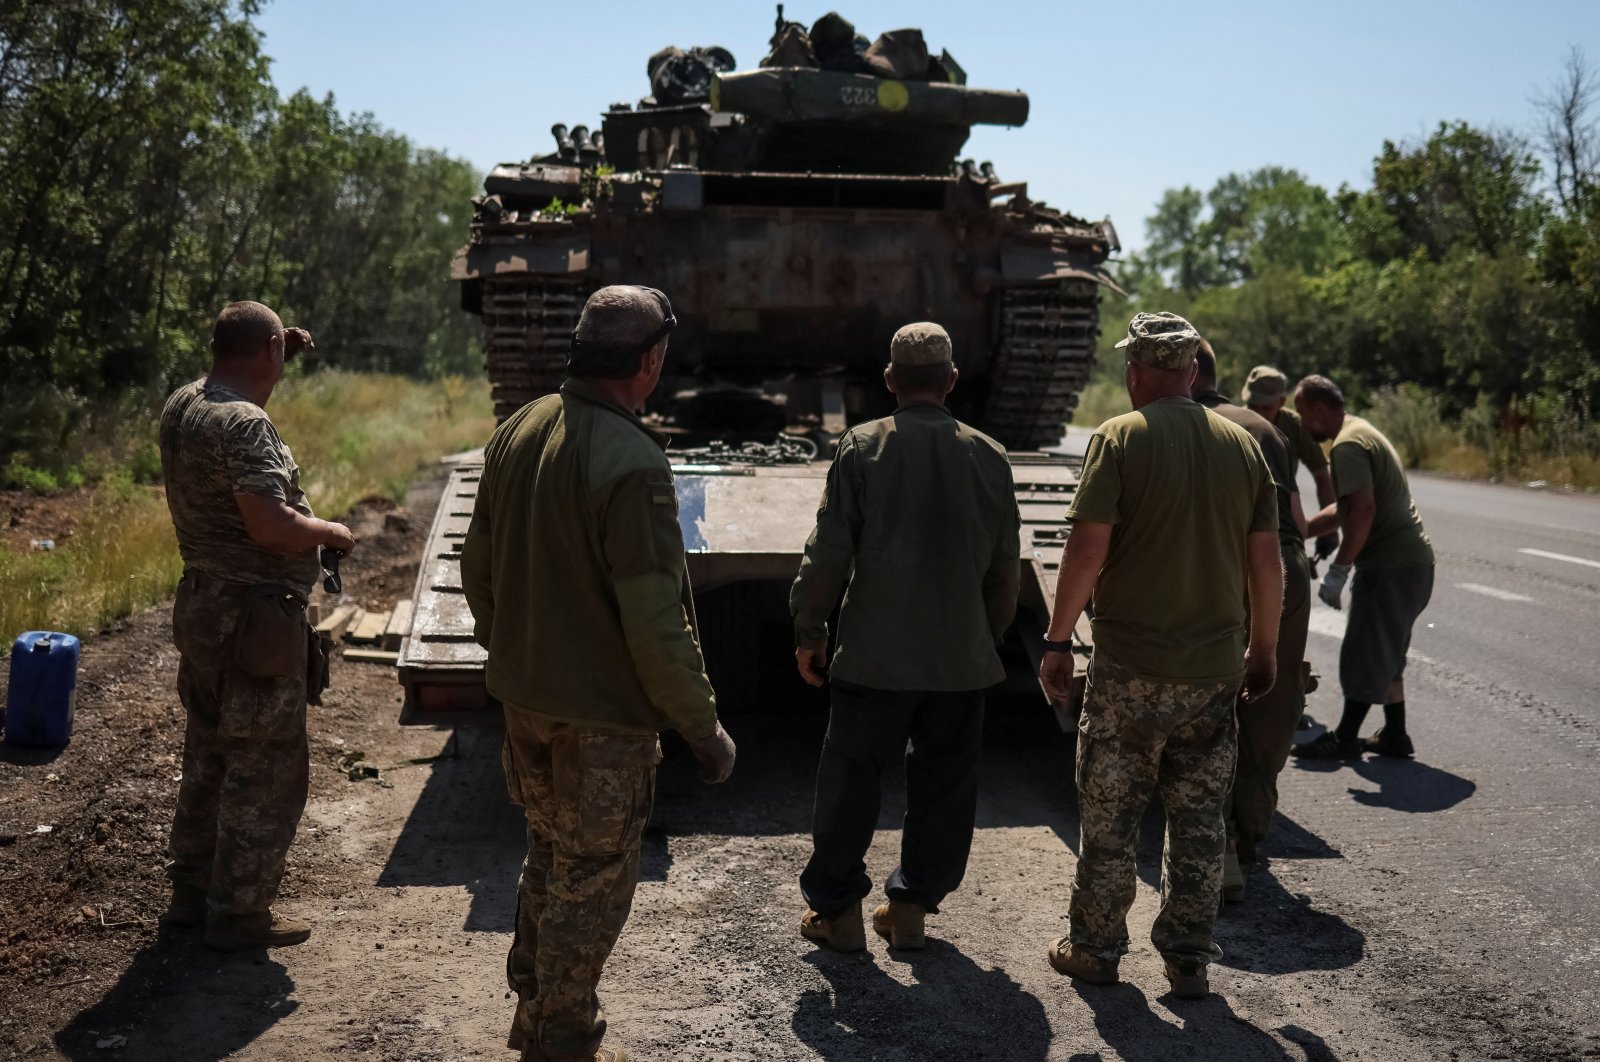 Ukrainian servicemen stand near a military truck with a tank on the road not far from front line, the Donbass region, Ukraine, July 17, 2022. (Reuters Photo)